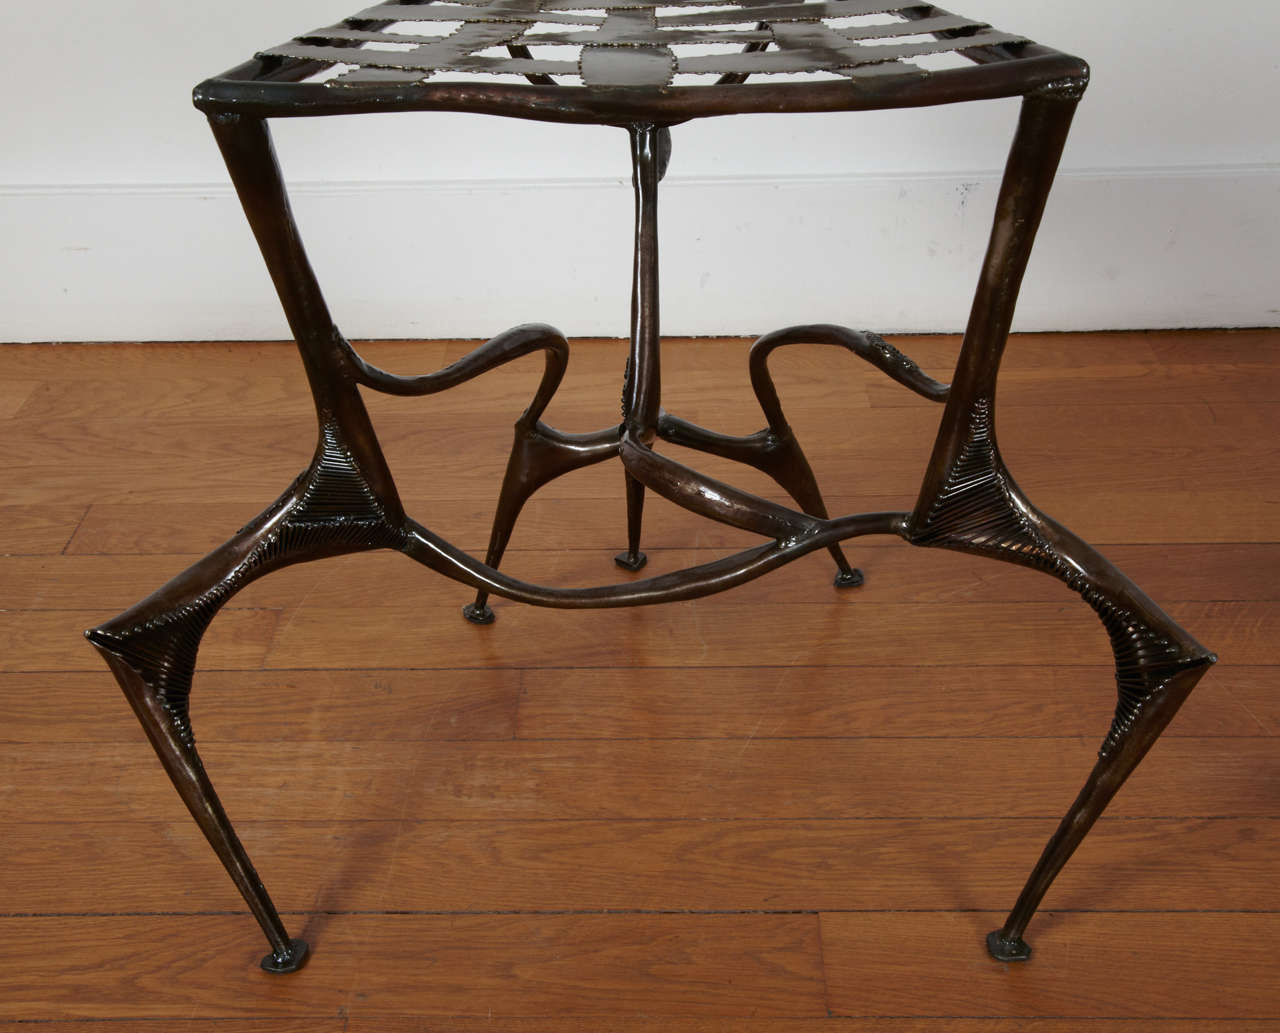 Two Steel Copperware Chairs, 2008 / 2013 by Manuel Simon. 3